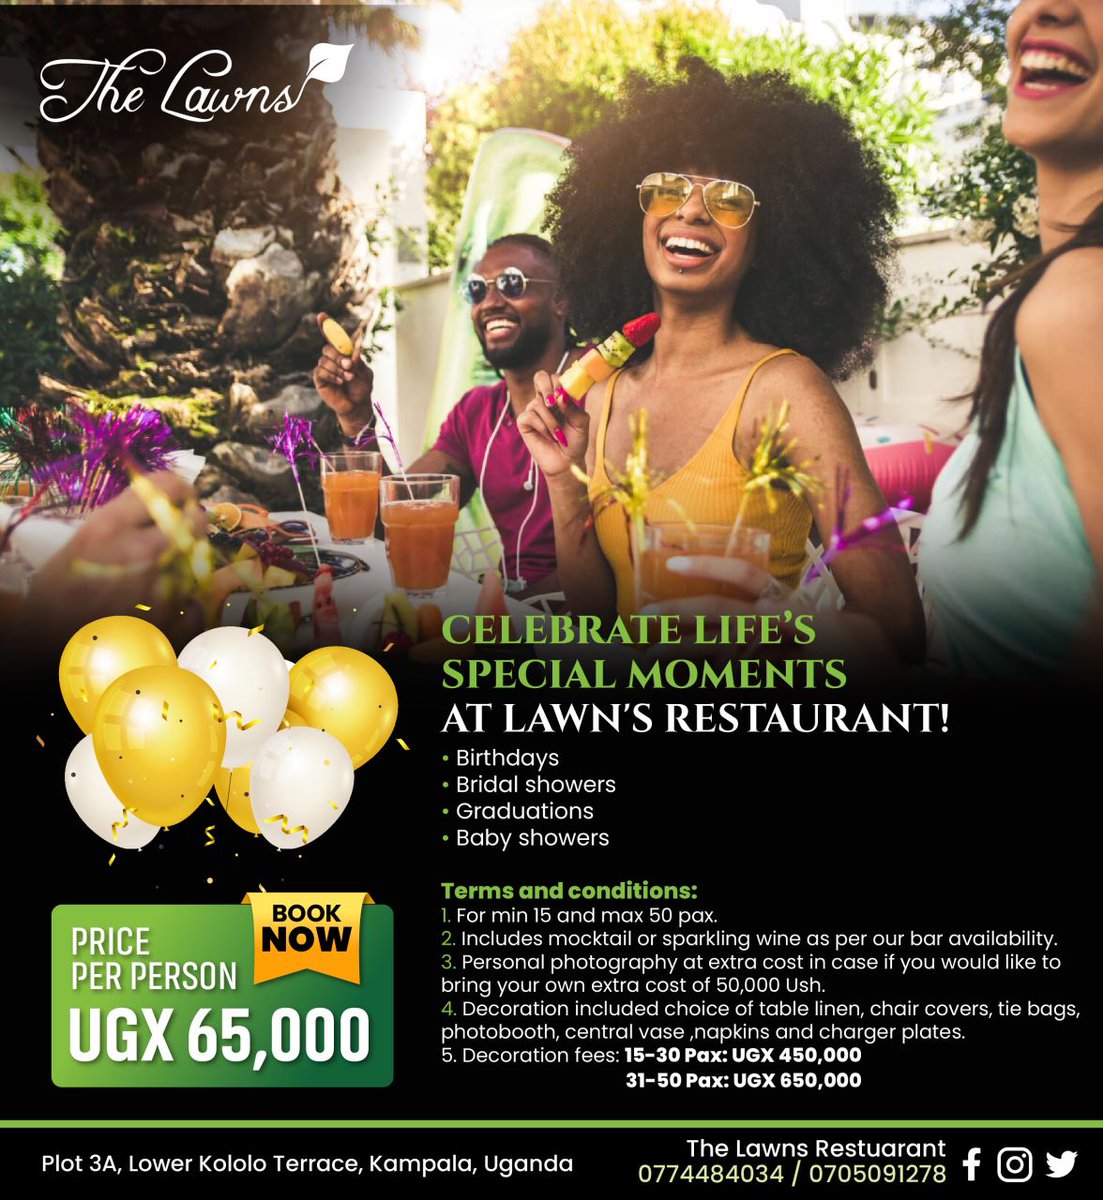 Make Every Occasion Memorable at Lawn's Restaurant! 🎉 From birthdays to bridal showers, enjoy a four-course meal with a choice of mocktail or sparkling wine for just 65,000 Ush per person. Here's to celebrating in style! #LawnsRestaurant #CelebrateInStyle #SpecialOccasions